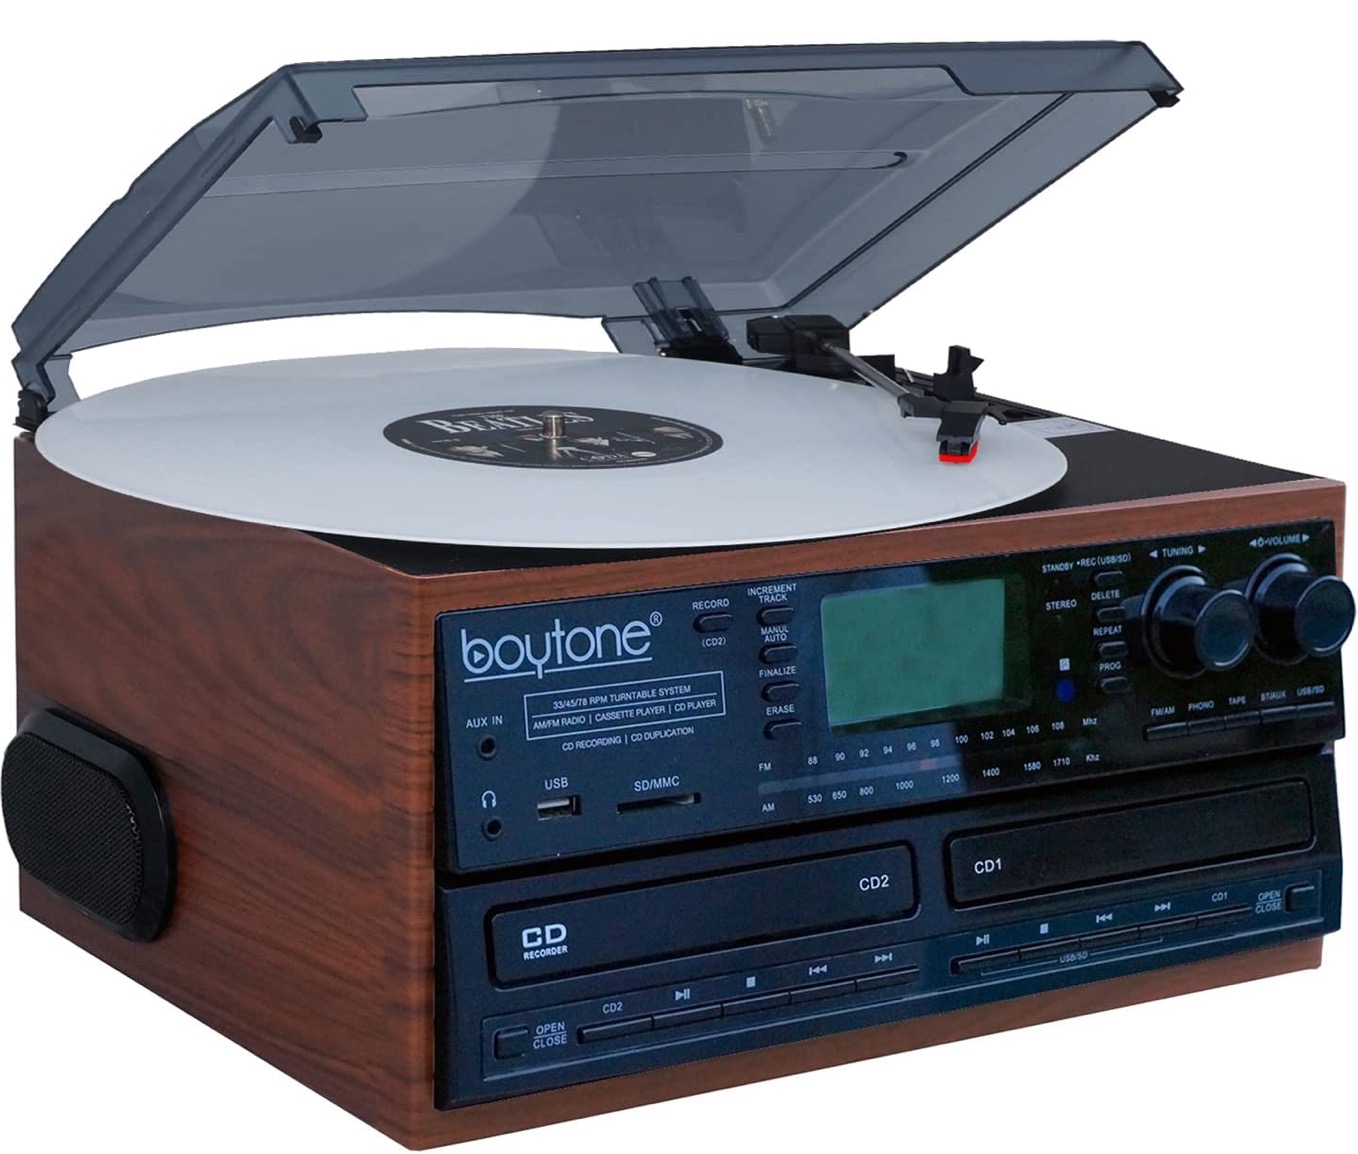 BT-29MB Boytone Dual CD Player Recorder Home Turntable System